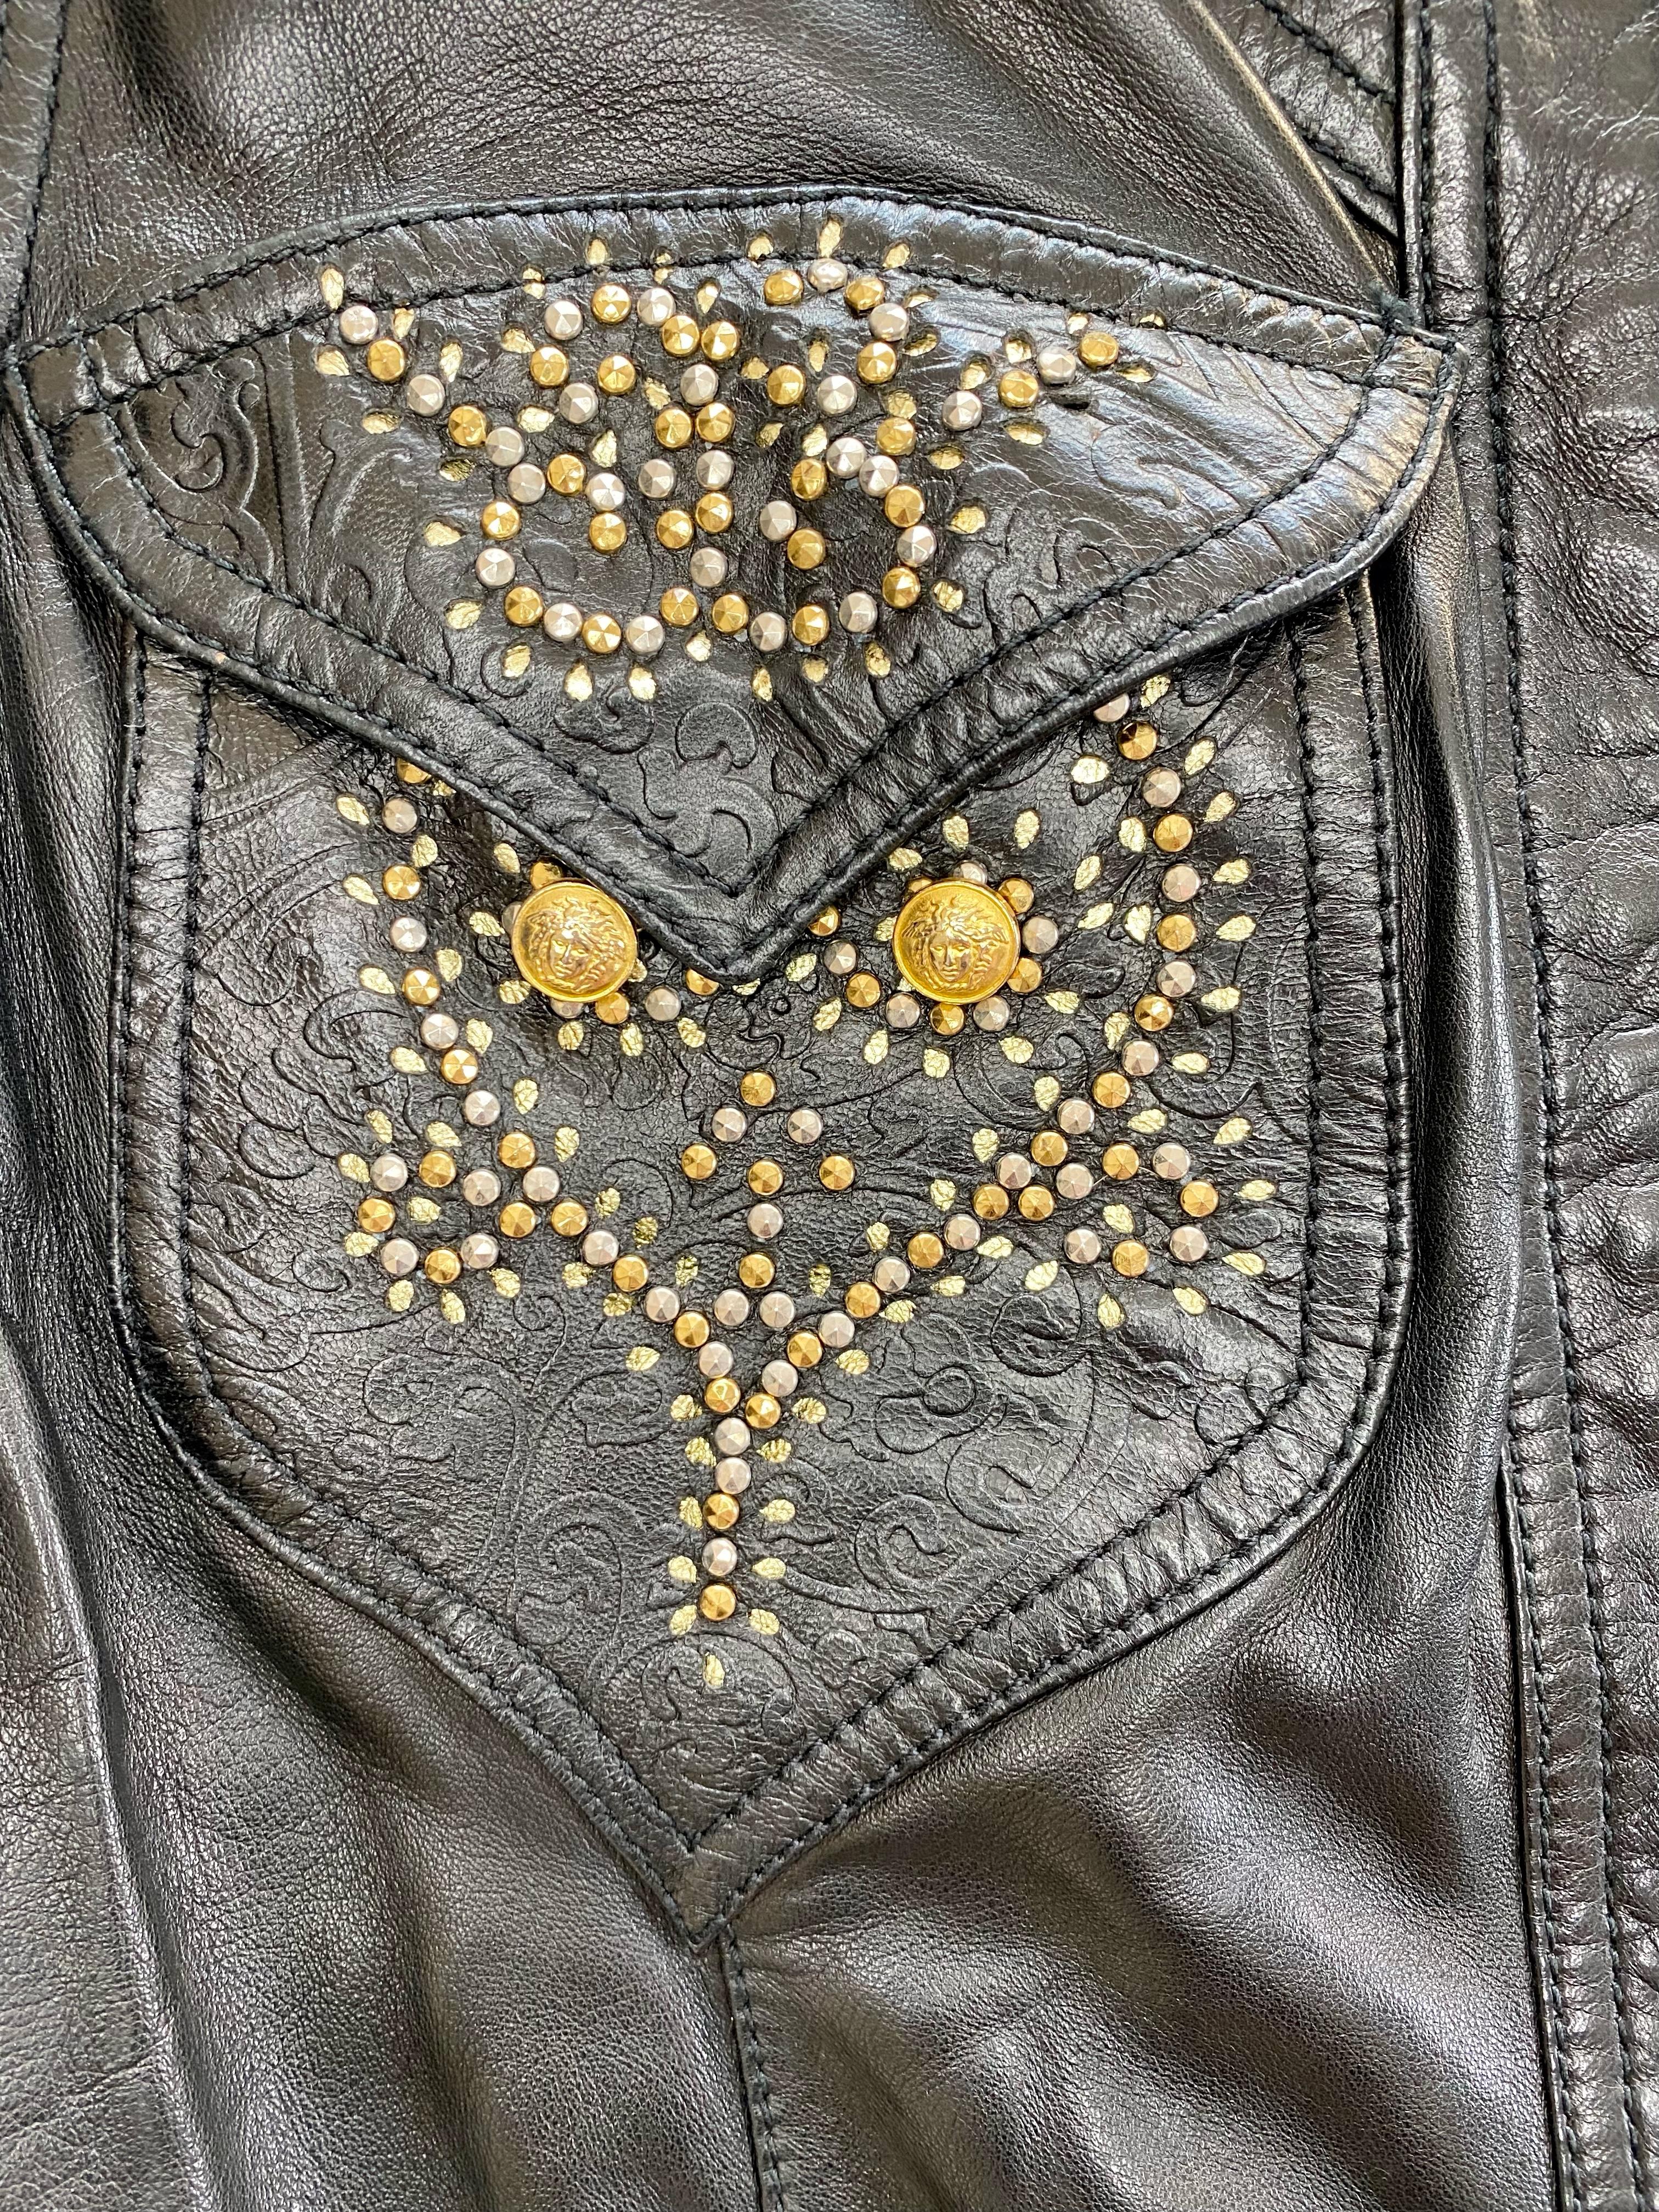 Women's F/W 1992 Gianni Versace 'Miss S&M' Studded Leather Vest Medusa Accents For Sale